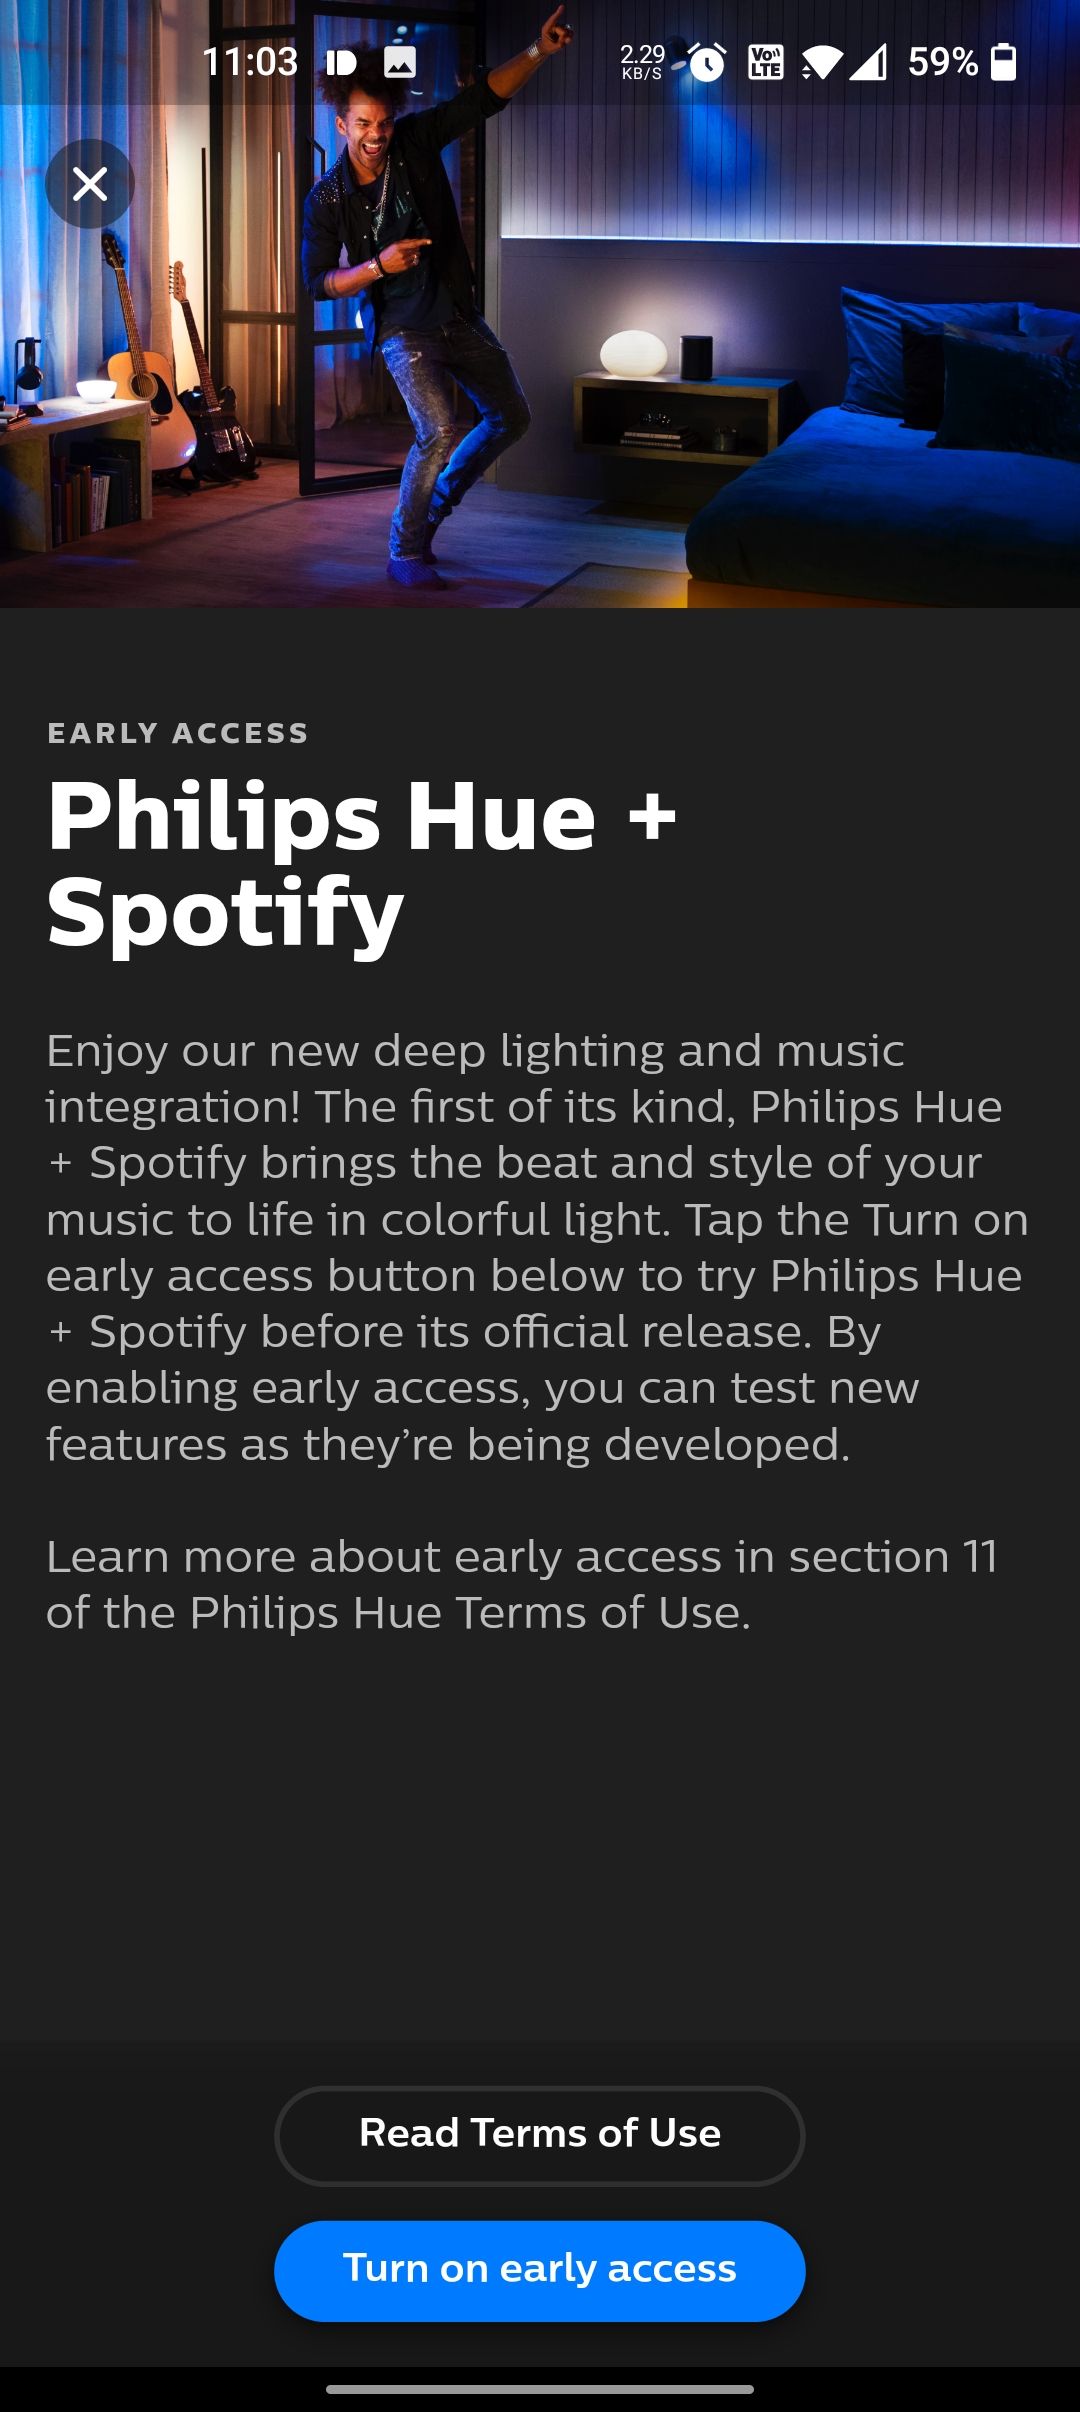 Make Your At-Home Dance Party Complete With Philips Hue + Spotify